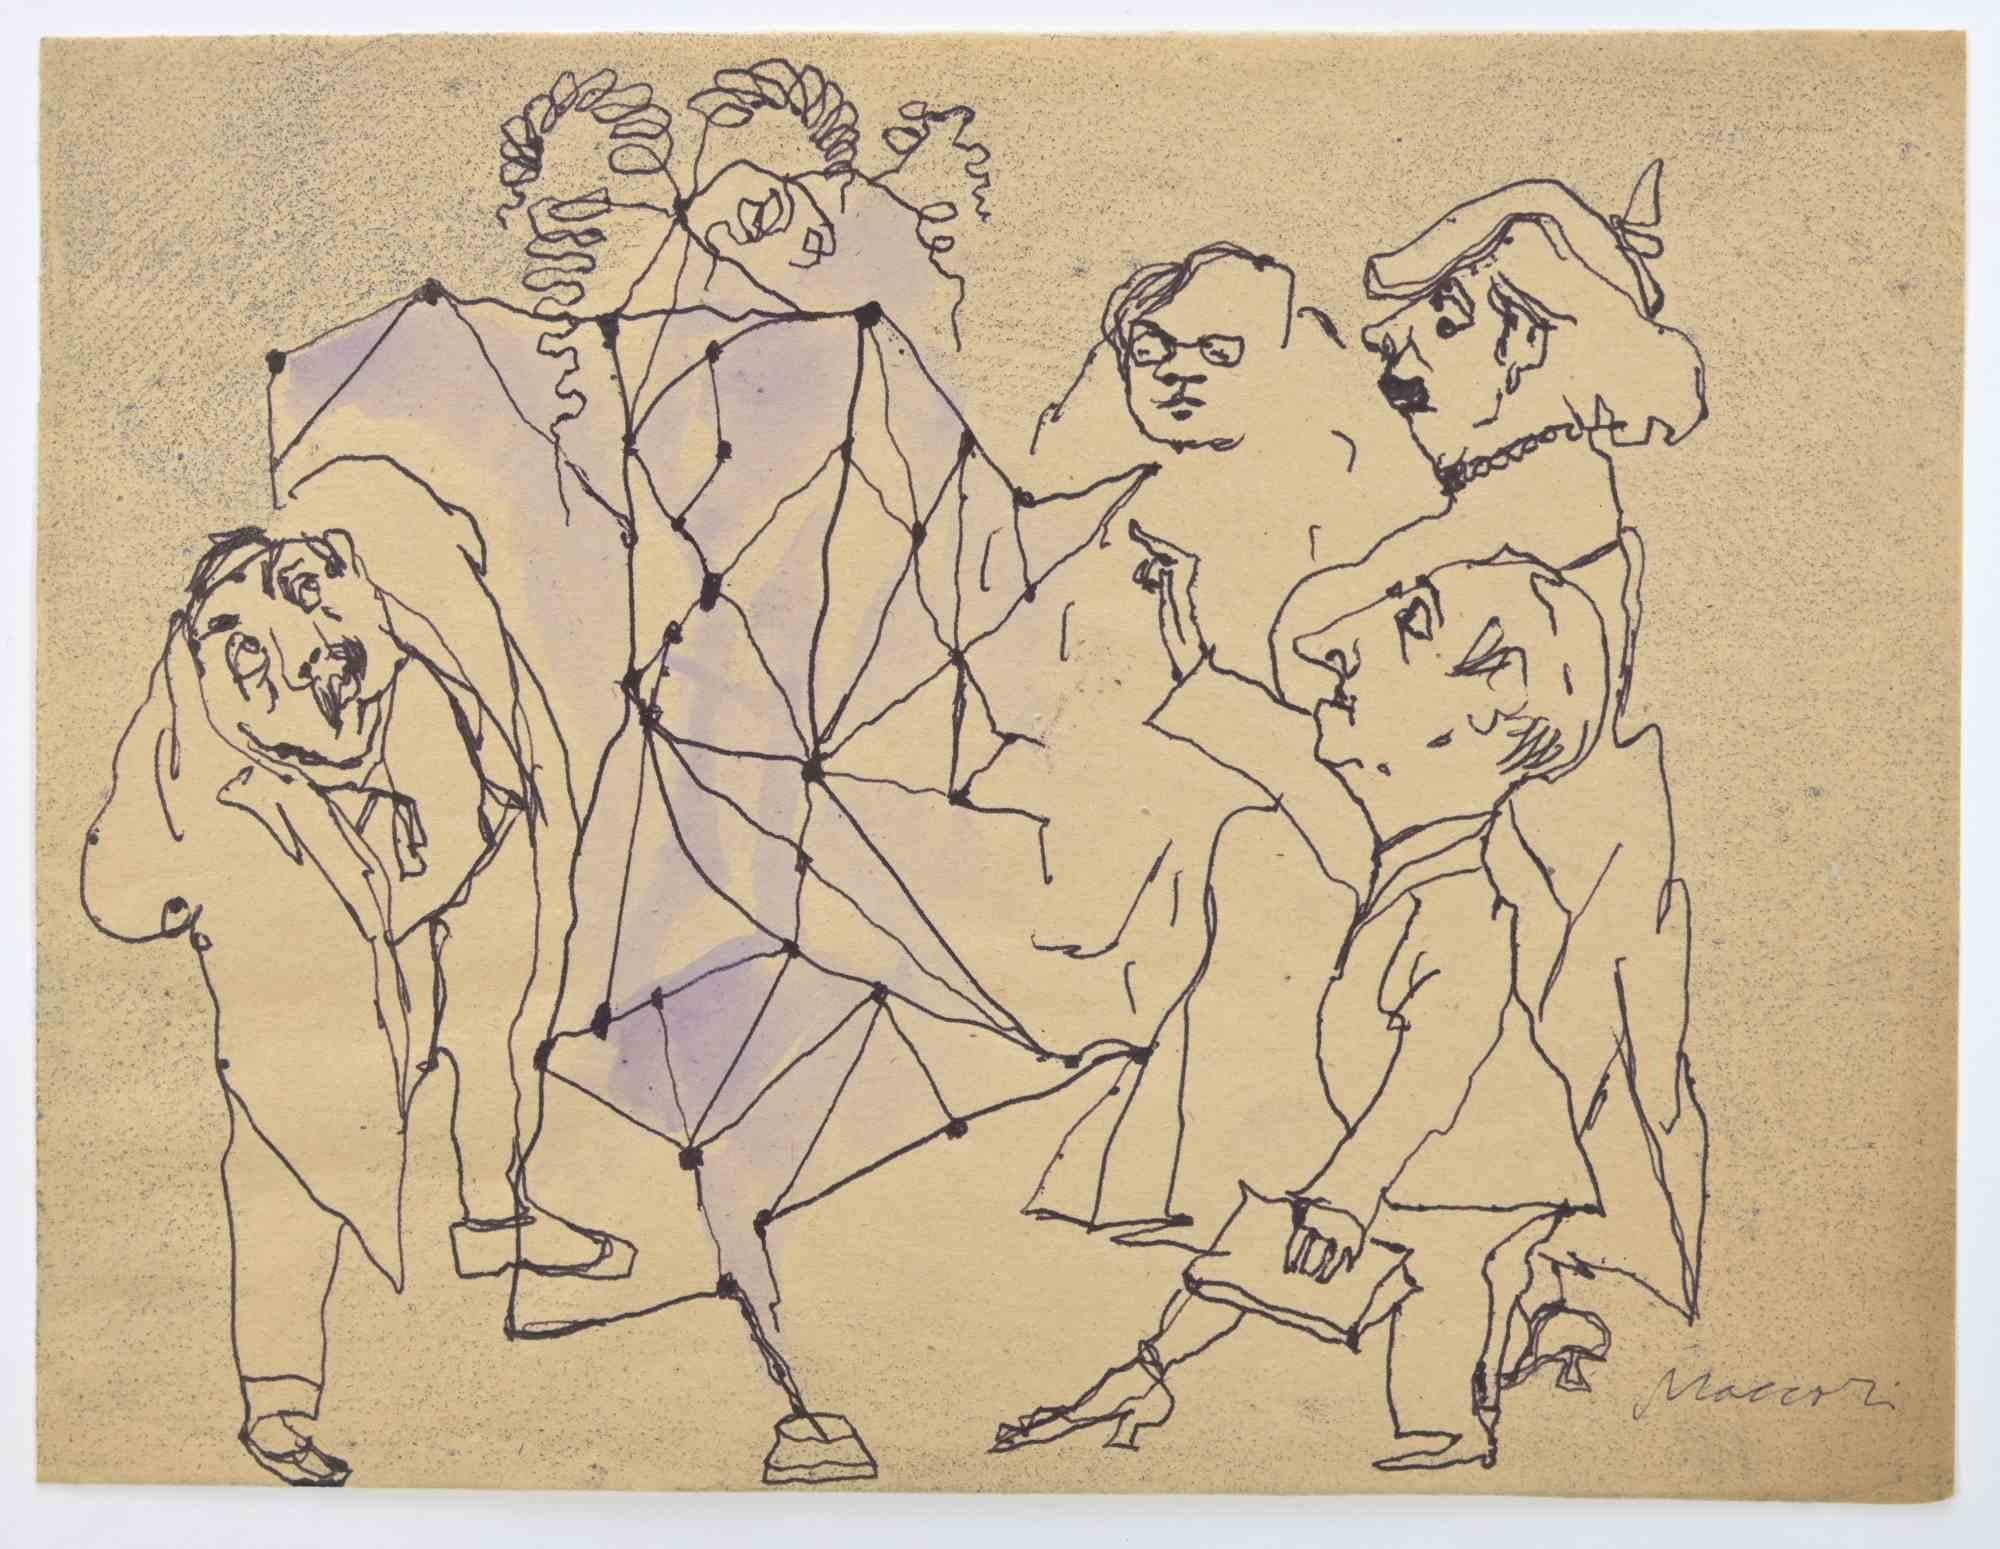 The Puzzling Show is a Pen Drawing realized by Mino Maccari  (1924-1989) in the 1960s.

Hand-signed in the lower margin.

Good condition.

Mino Maccari (Siena, 1924-Rome, June 16, 1989) was an Italian writer, painter, engraver and journalist, winner